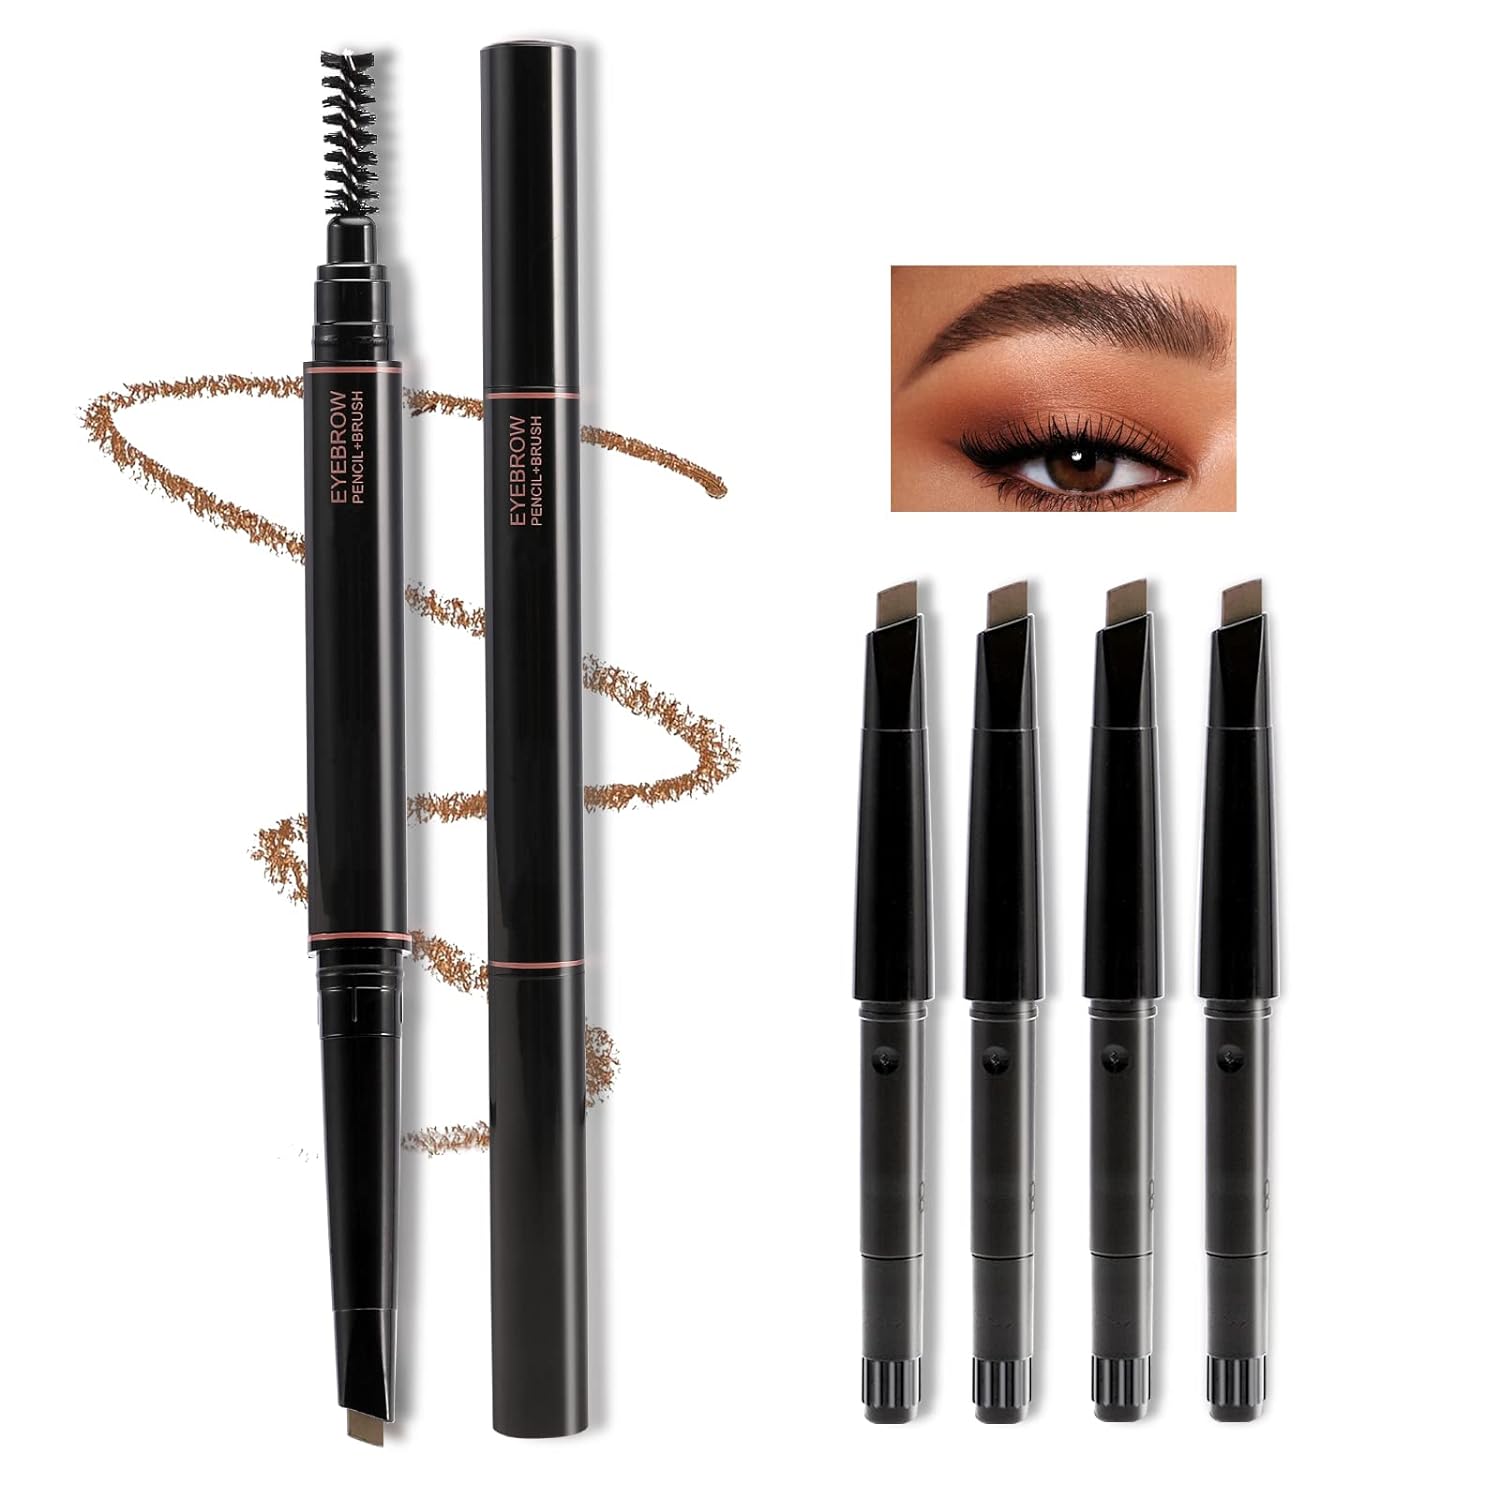 Boobeen Brow Definer Pencil Waterproof Eyebrow Pencil Set Fills Brows - Double-Headed Brow Pencil with 4 Replaceable Refills, Durable and Long Lasting